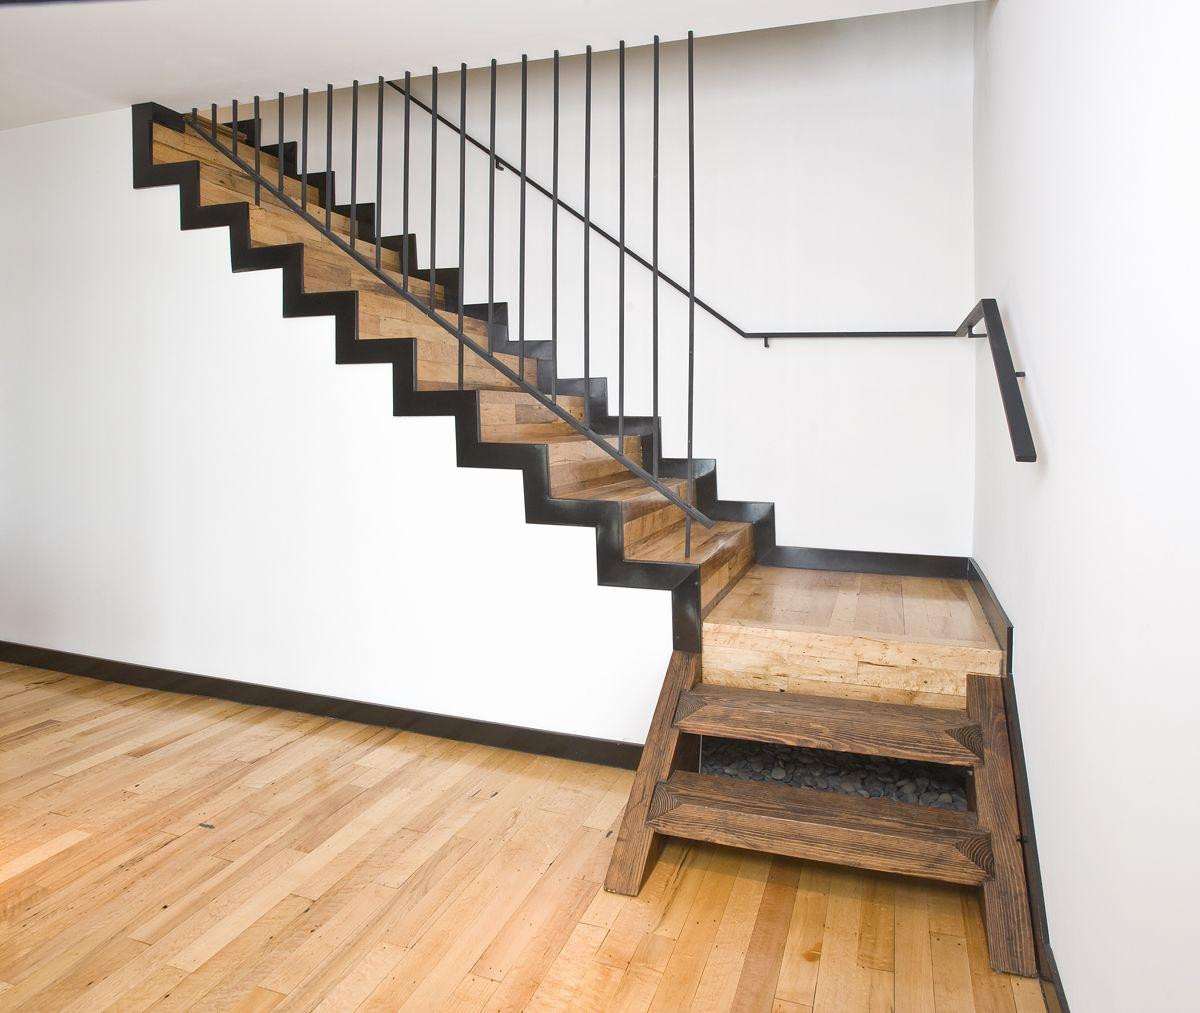 25 Recommended Hardwood Floor Different Color Than Stairs 2022 free download hardwood floor different color than stairs of new of diy stair railing ideas stock artsvisuelscaribeens com pertaining to diy stair railing ideas elegant staircase railing ideas pin od pouac